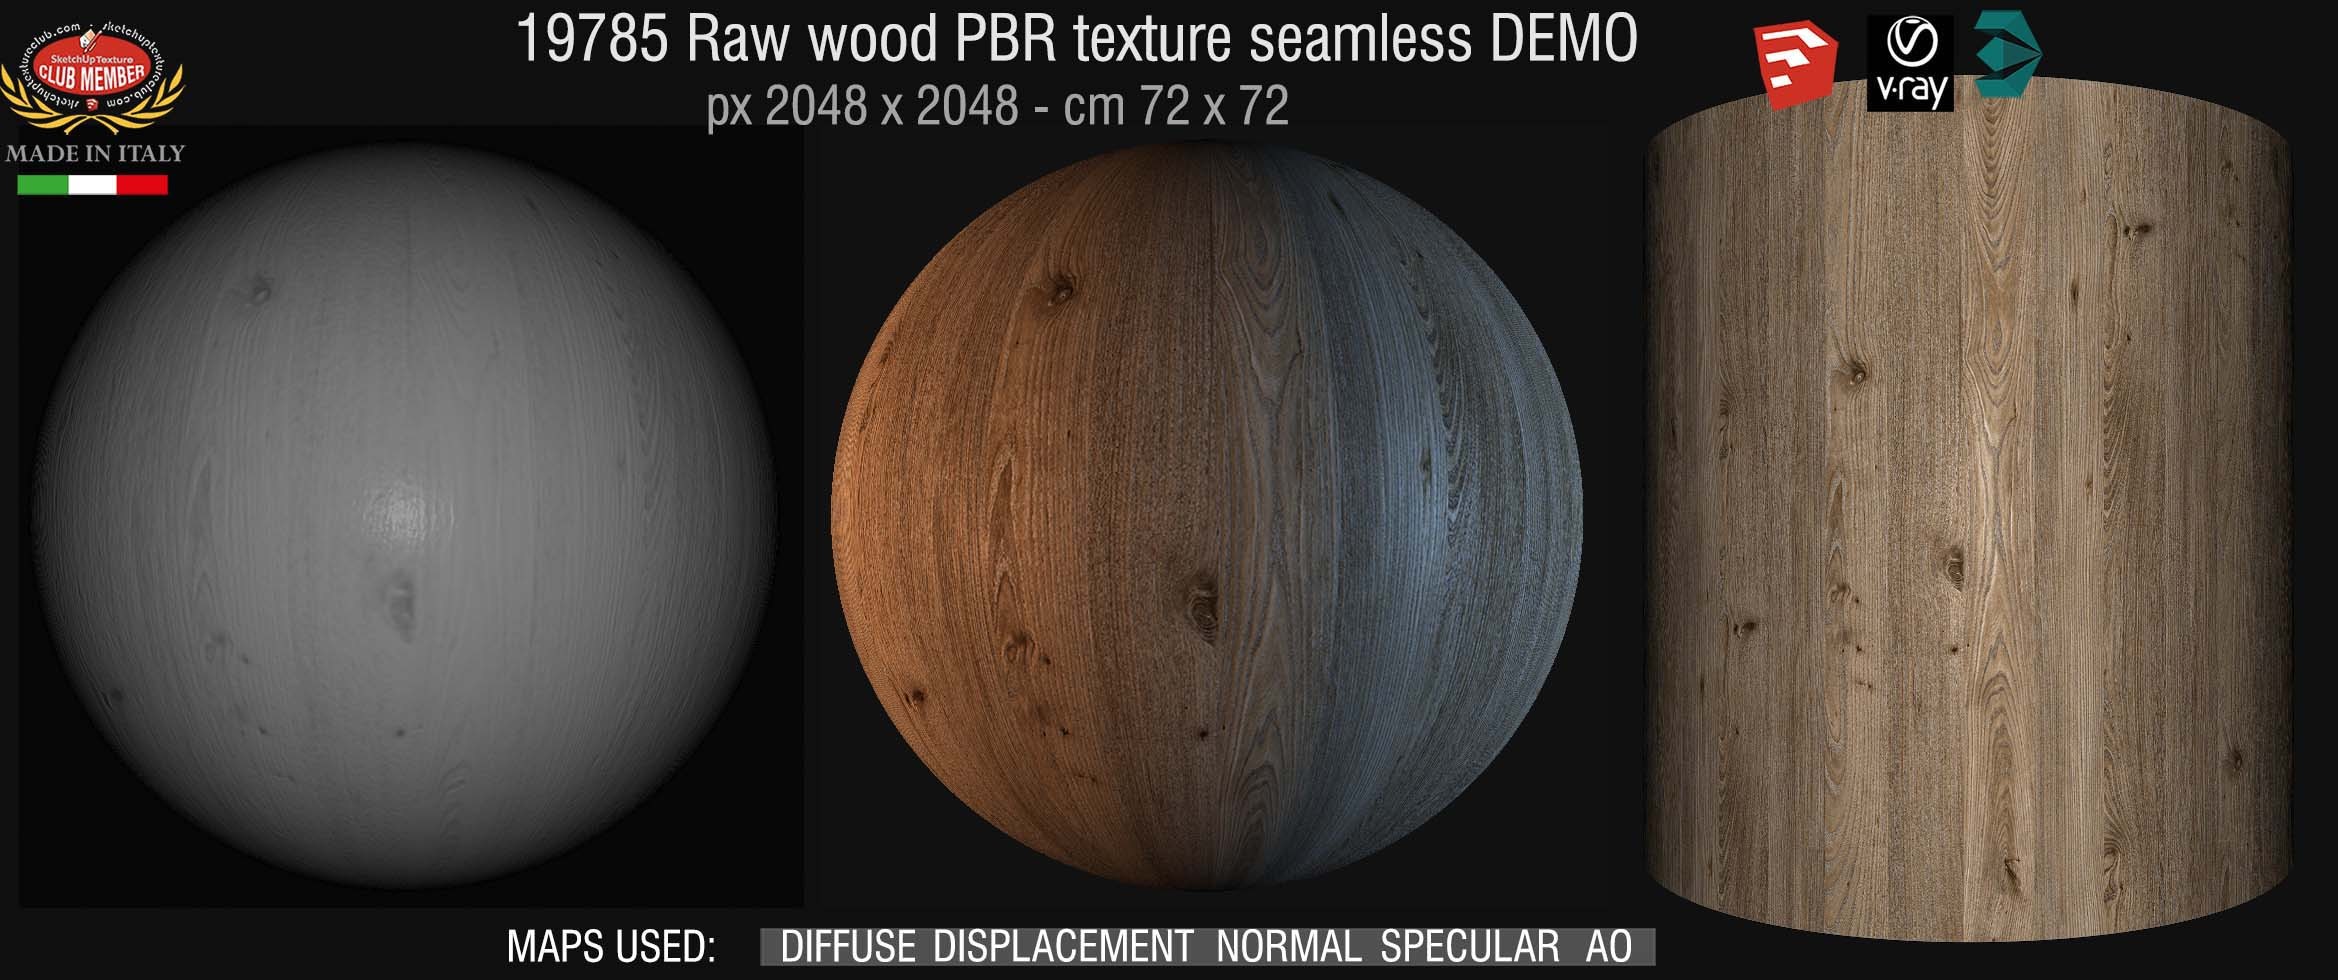 19785 Raw wood surface PBR texture seamless demo